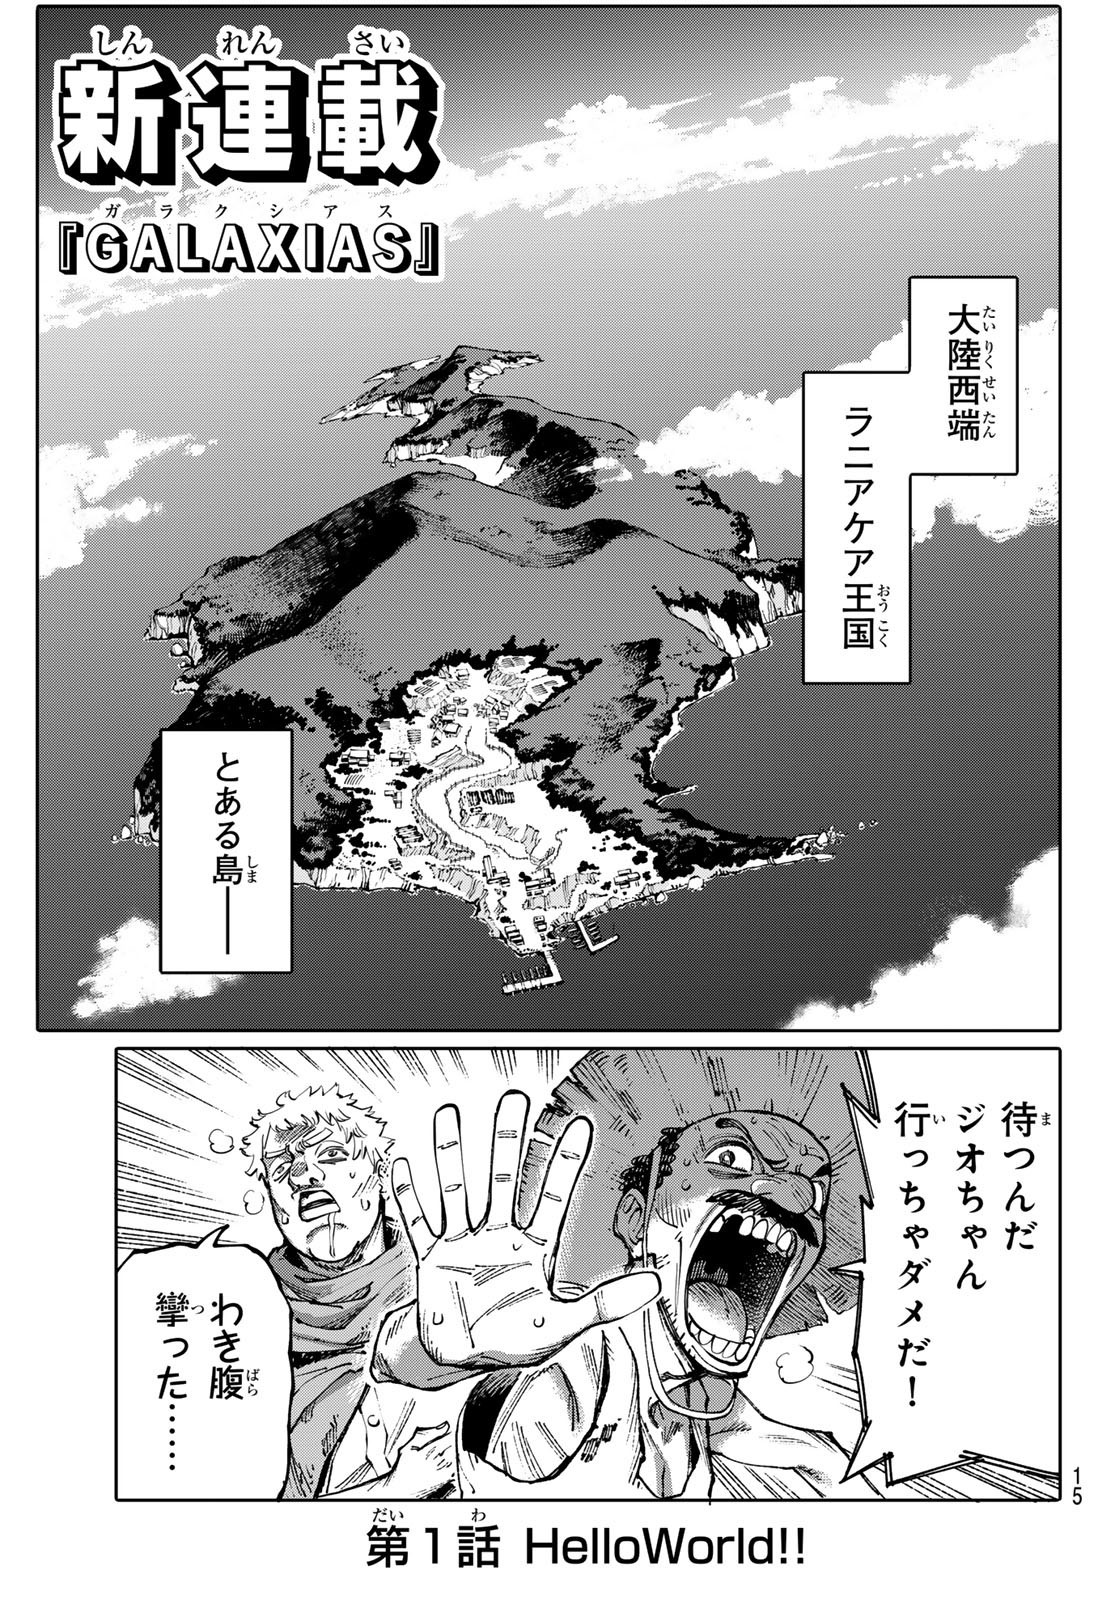 Weekly Shōnen Magazine - 週刊少年マガジン - Chapter 2024-33 - Page 13